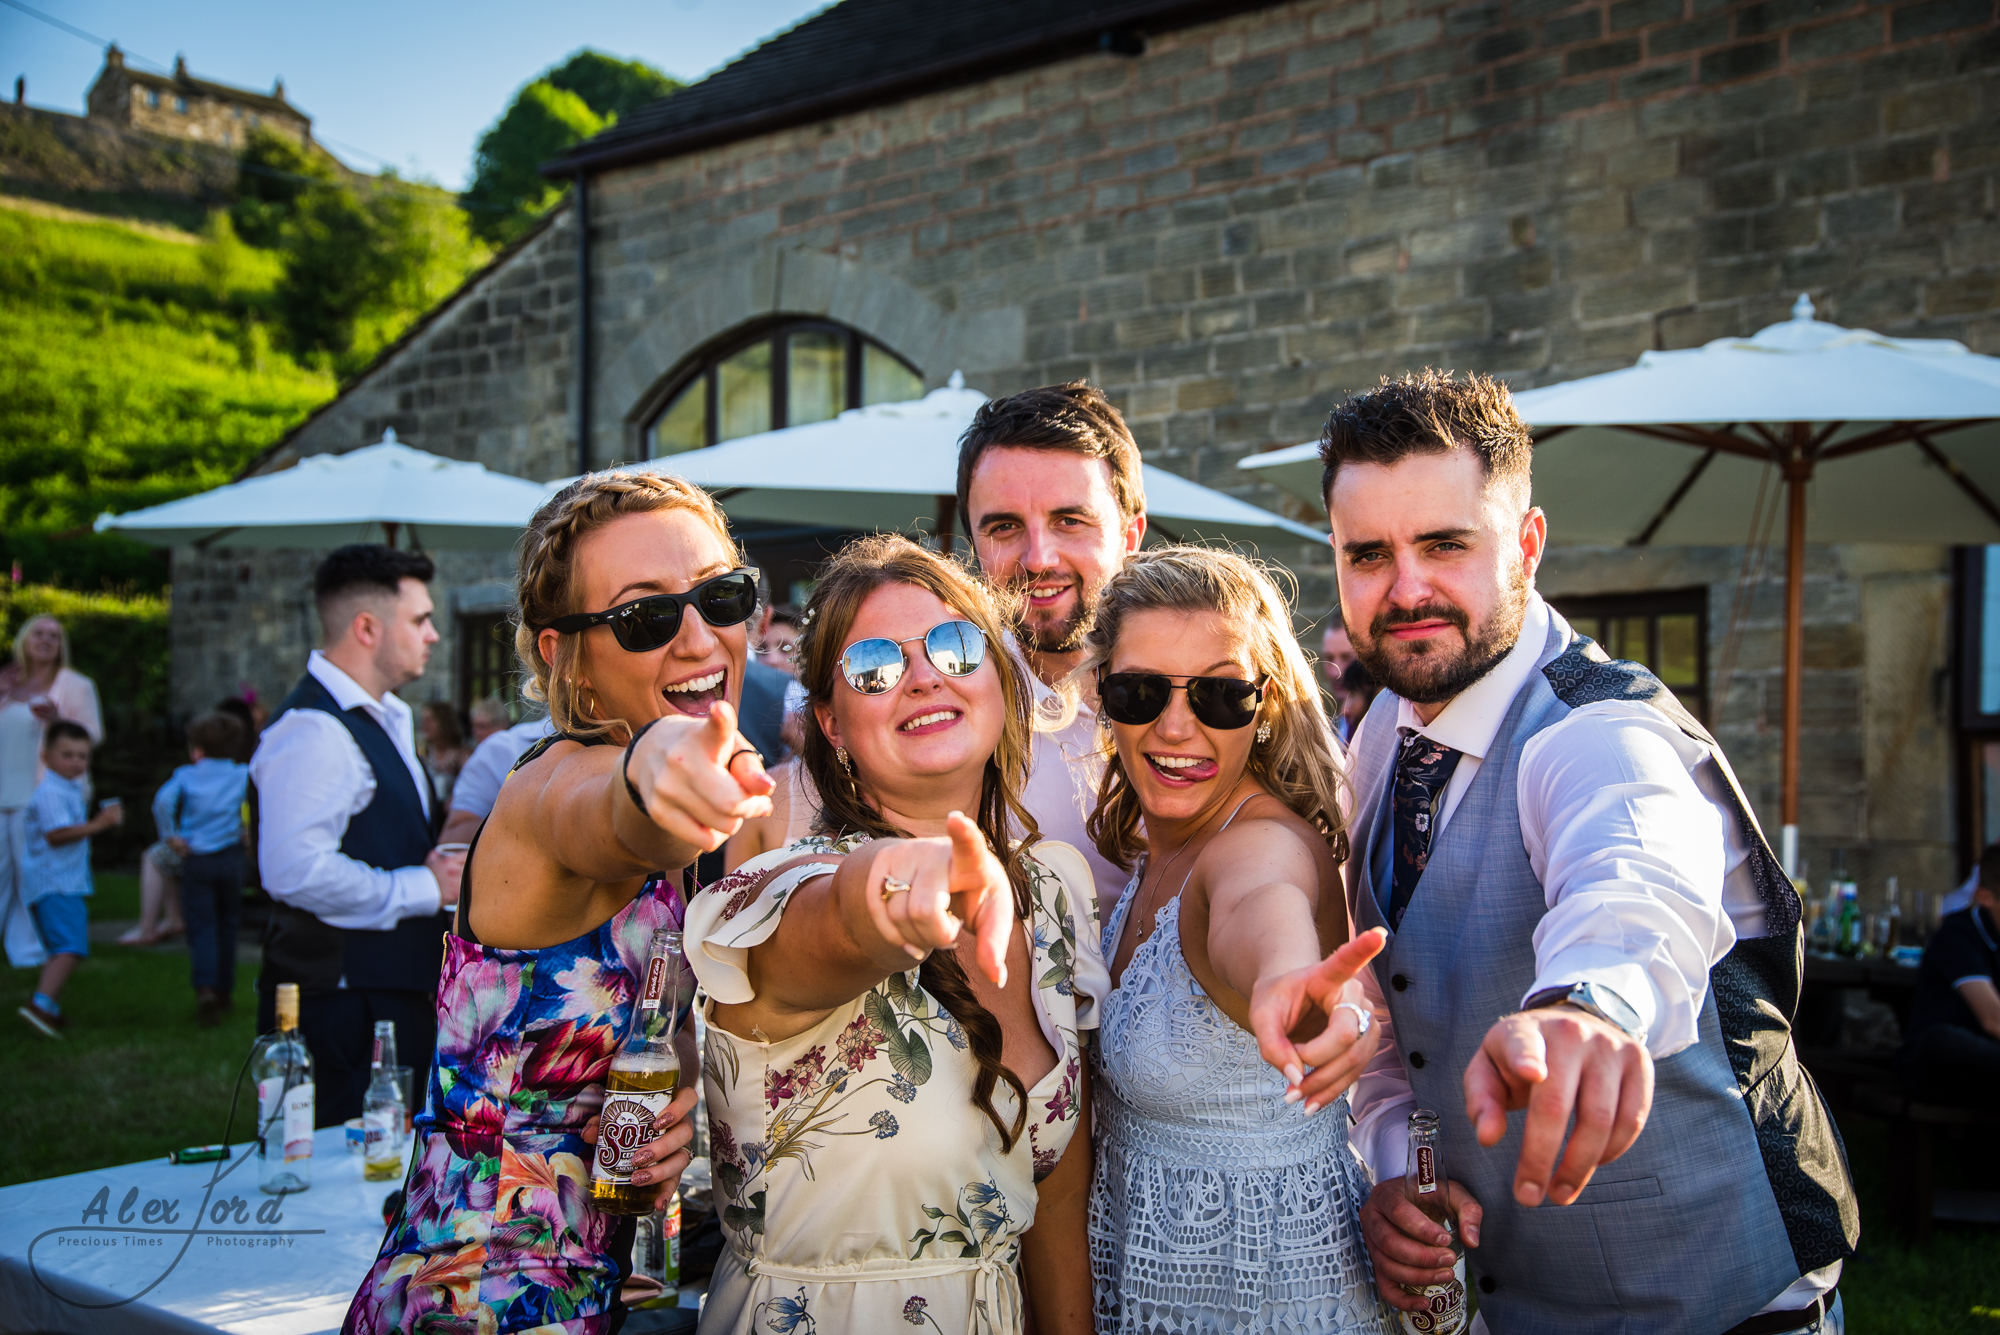 Five wedding guests point towards the camera with really big smiles on their faces